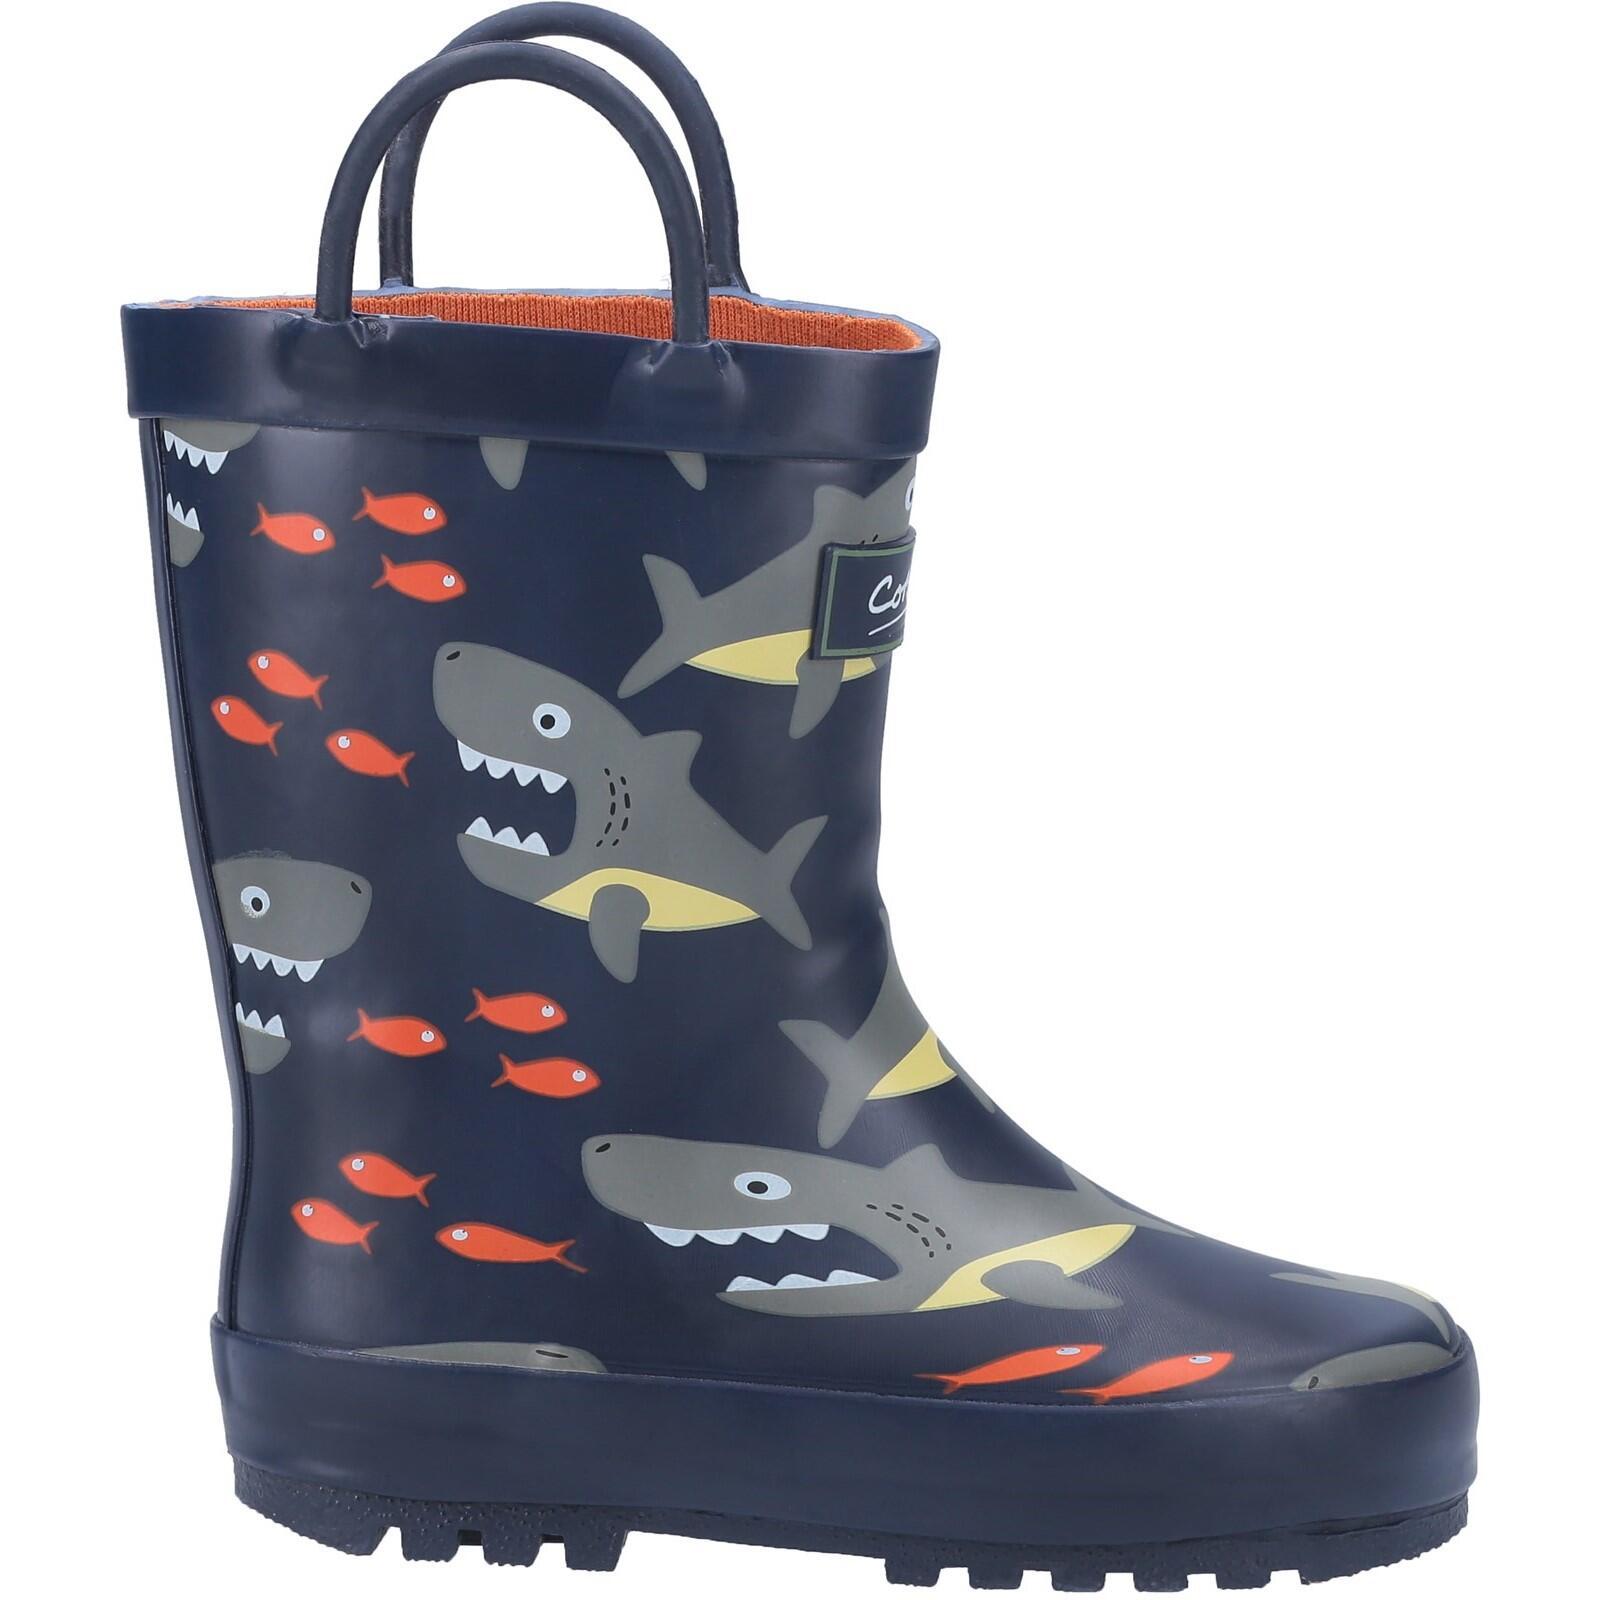 Puddle Childrens Wellingtons GREY 1/4